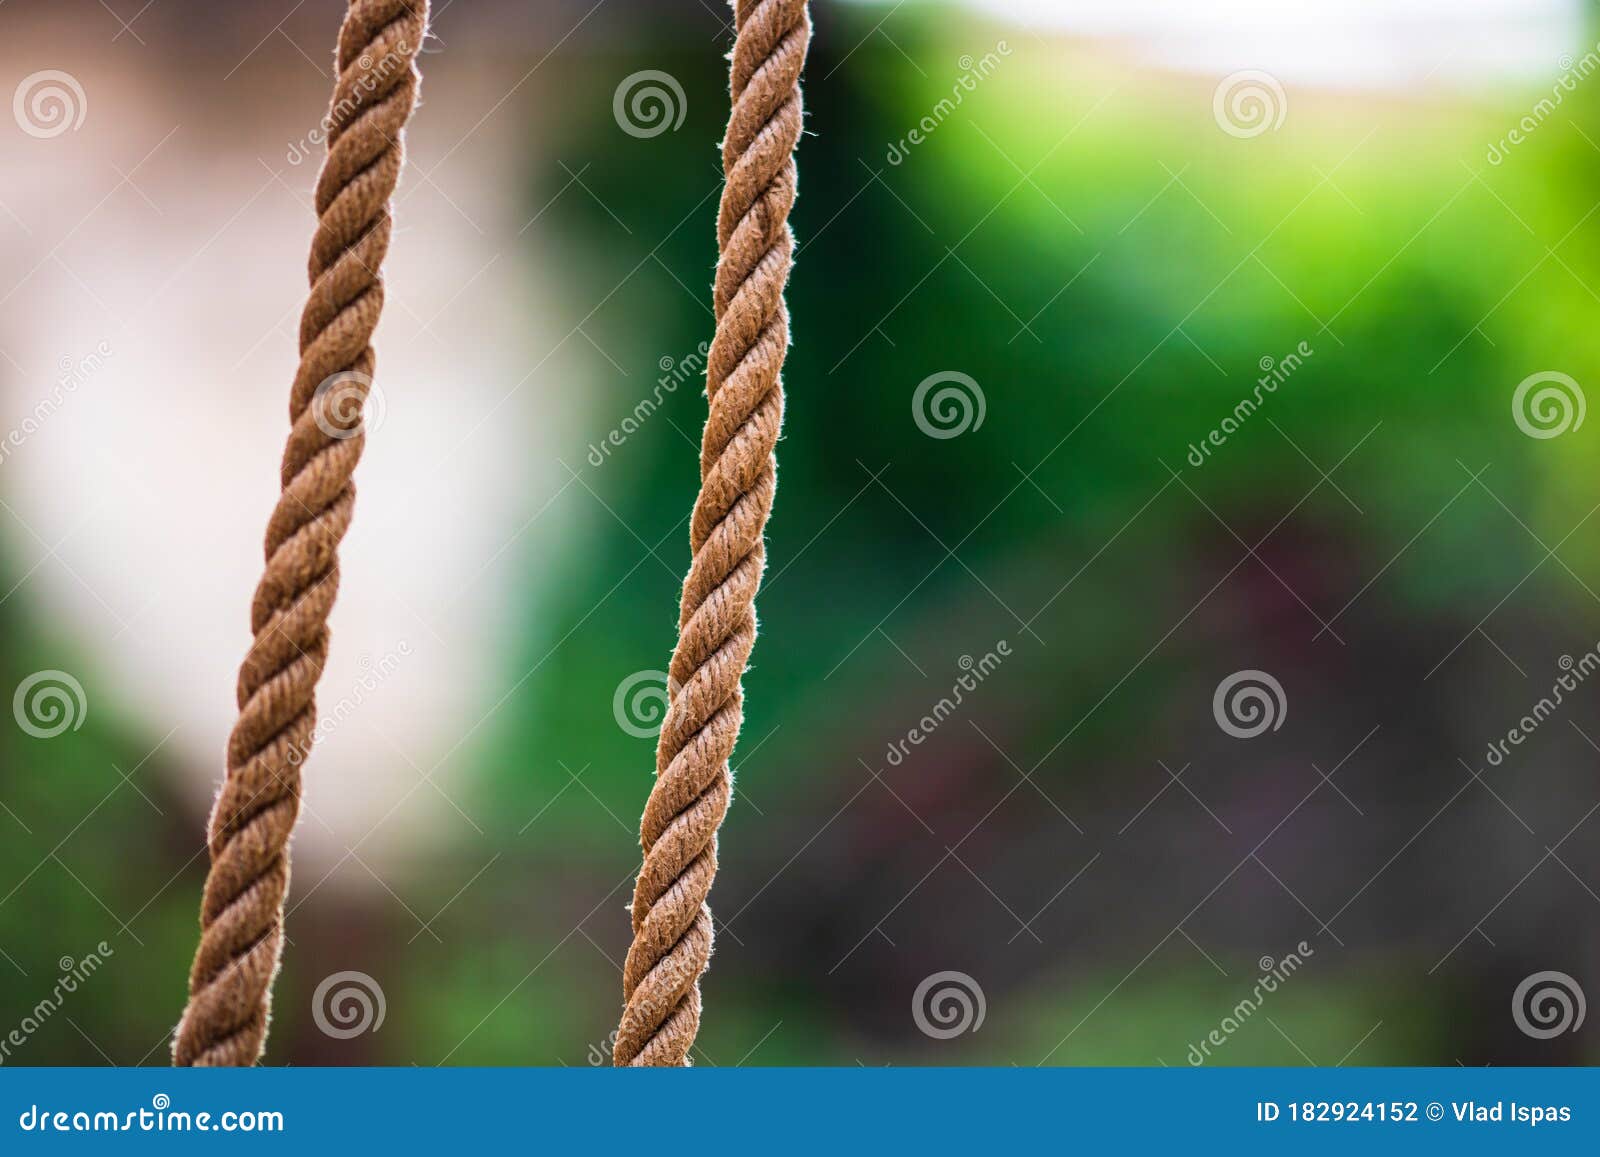 Abstract Composition, Texture of Thick and Strong Hanging Rope